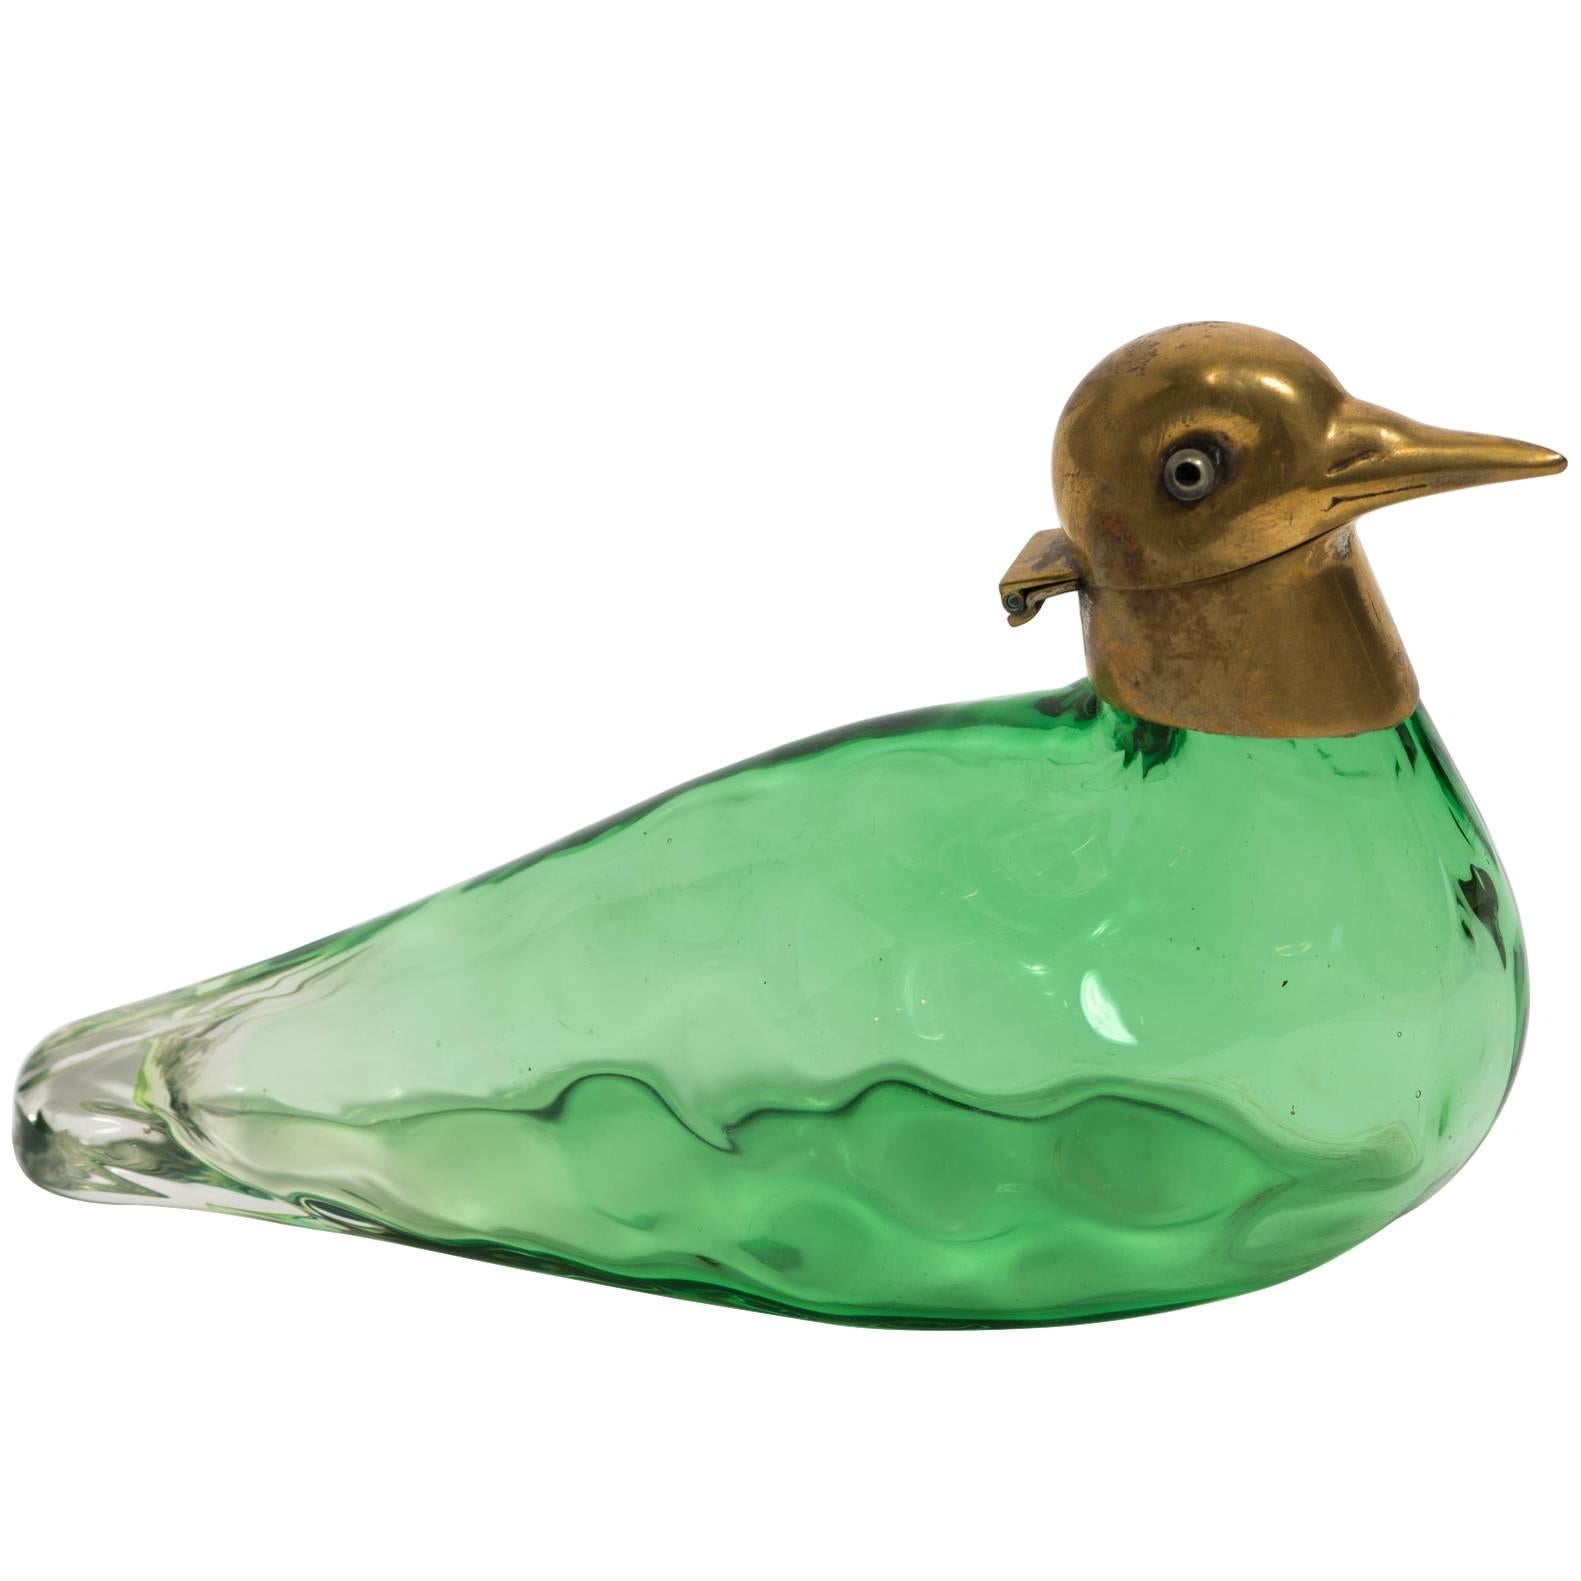 Austrian Perfume Bottle in the Form of a Bird